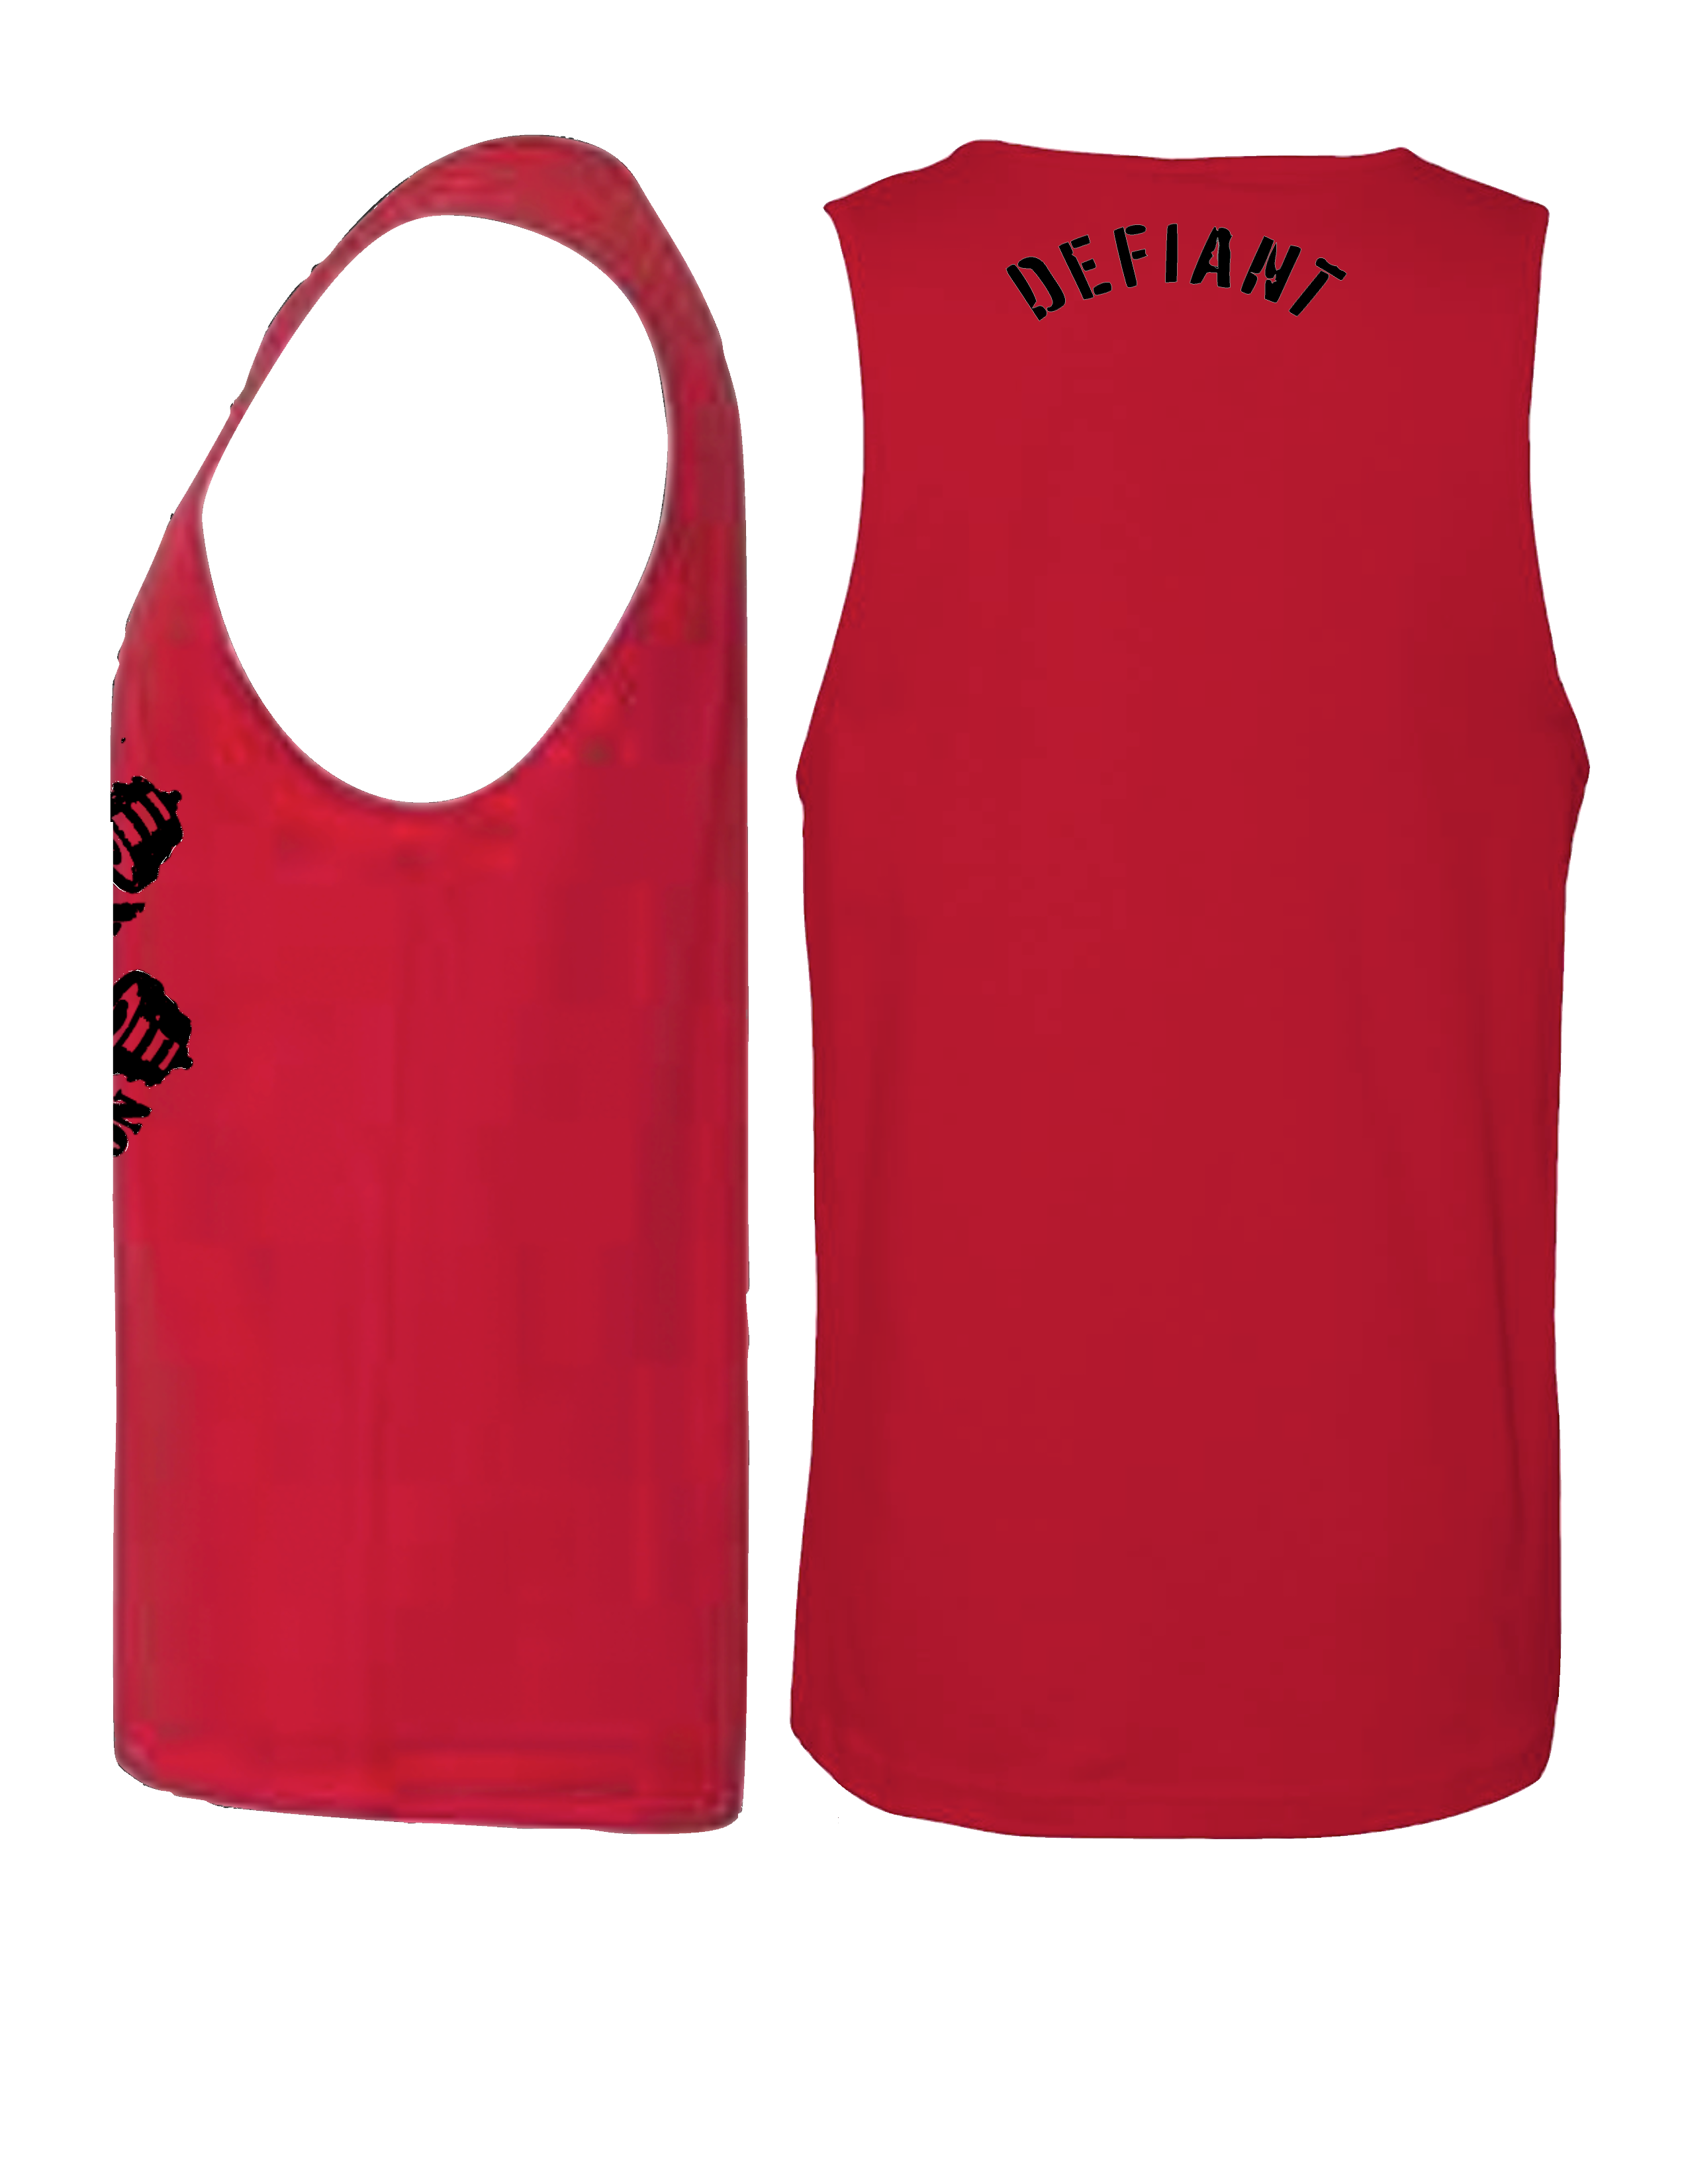 BODY AND MIND - MUSCLE TANK - RED IS BACK IN STOCK